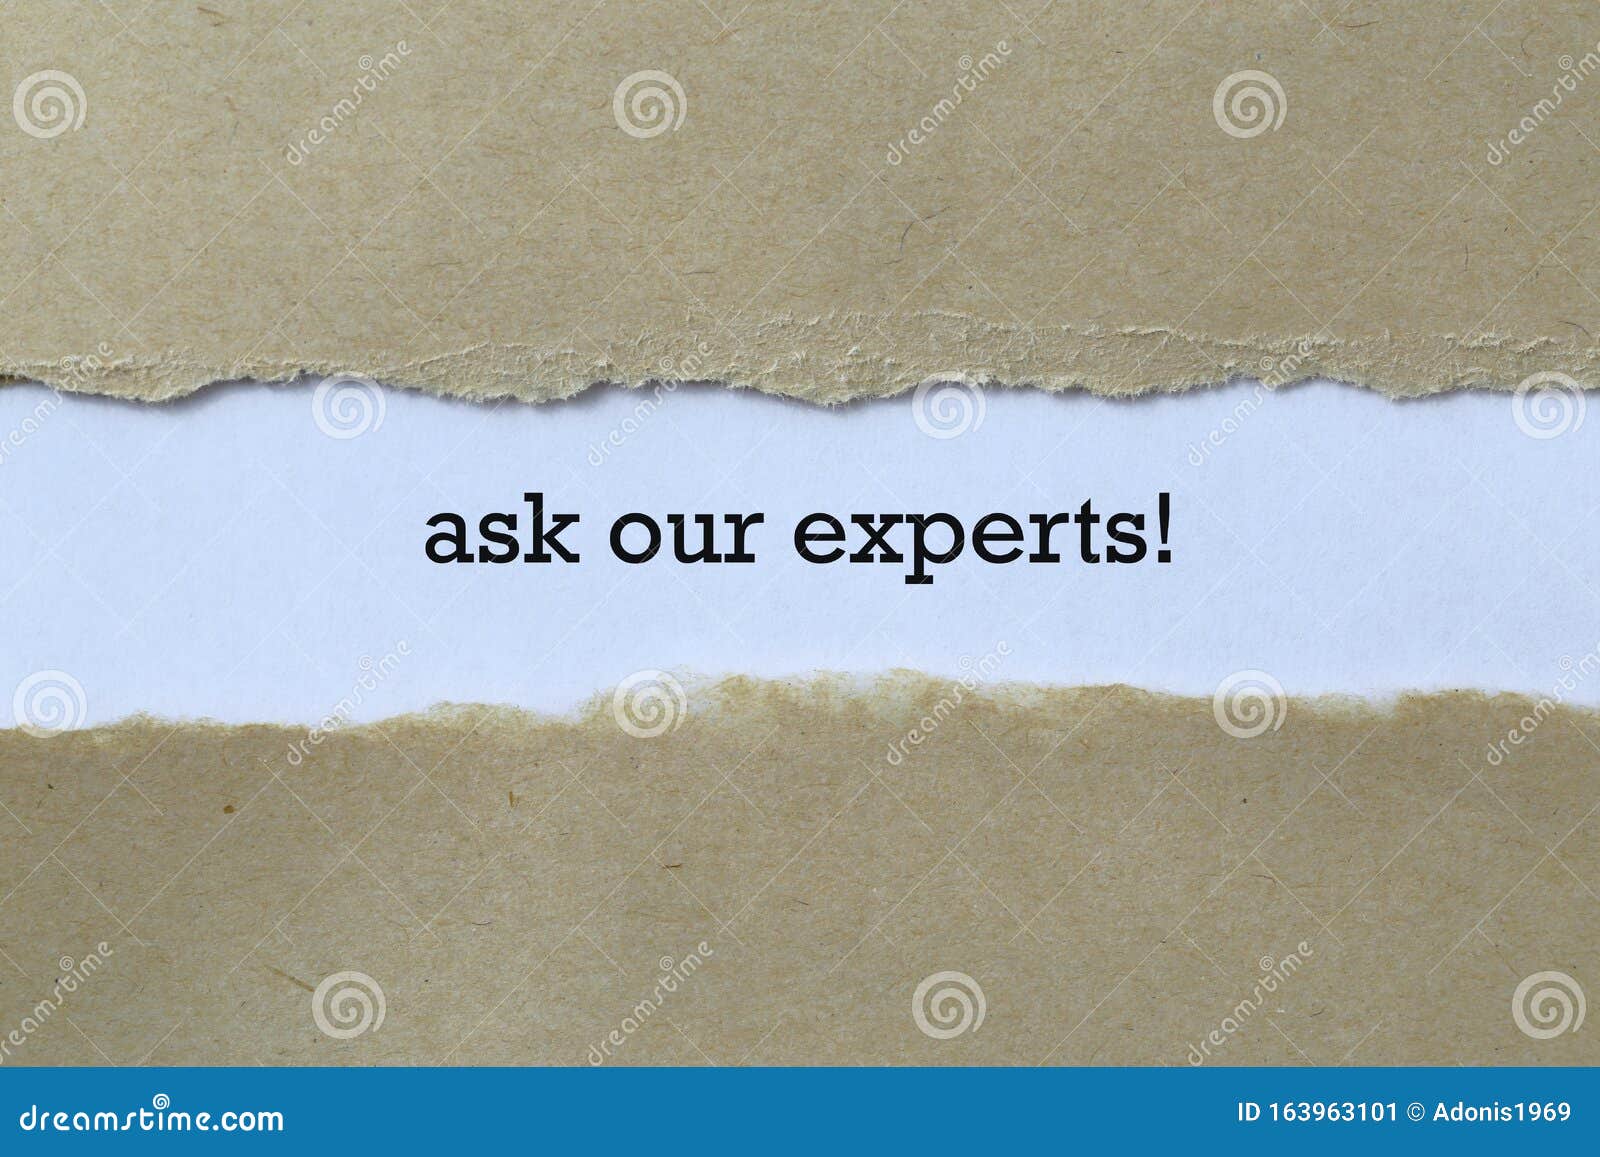 ask our experts